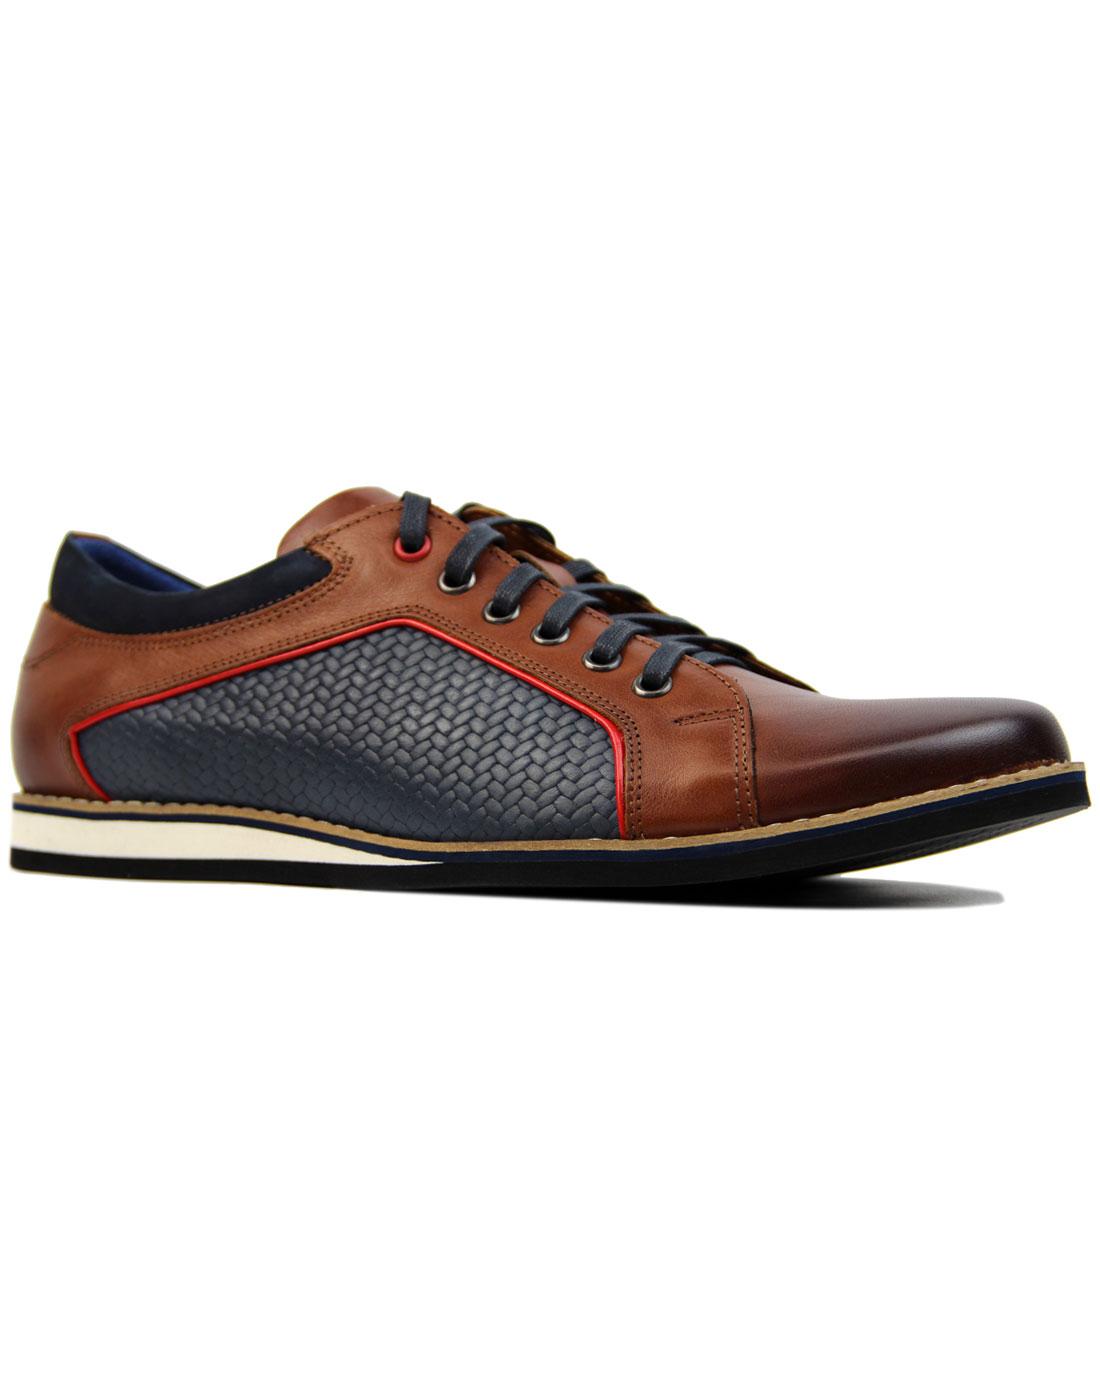 LACUZZO Retro Weave Northern Soul Trainer Shoes